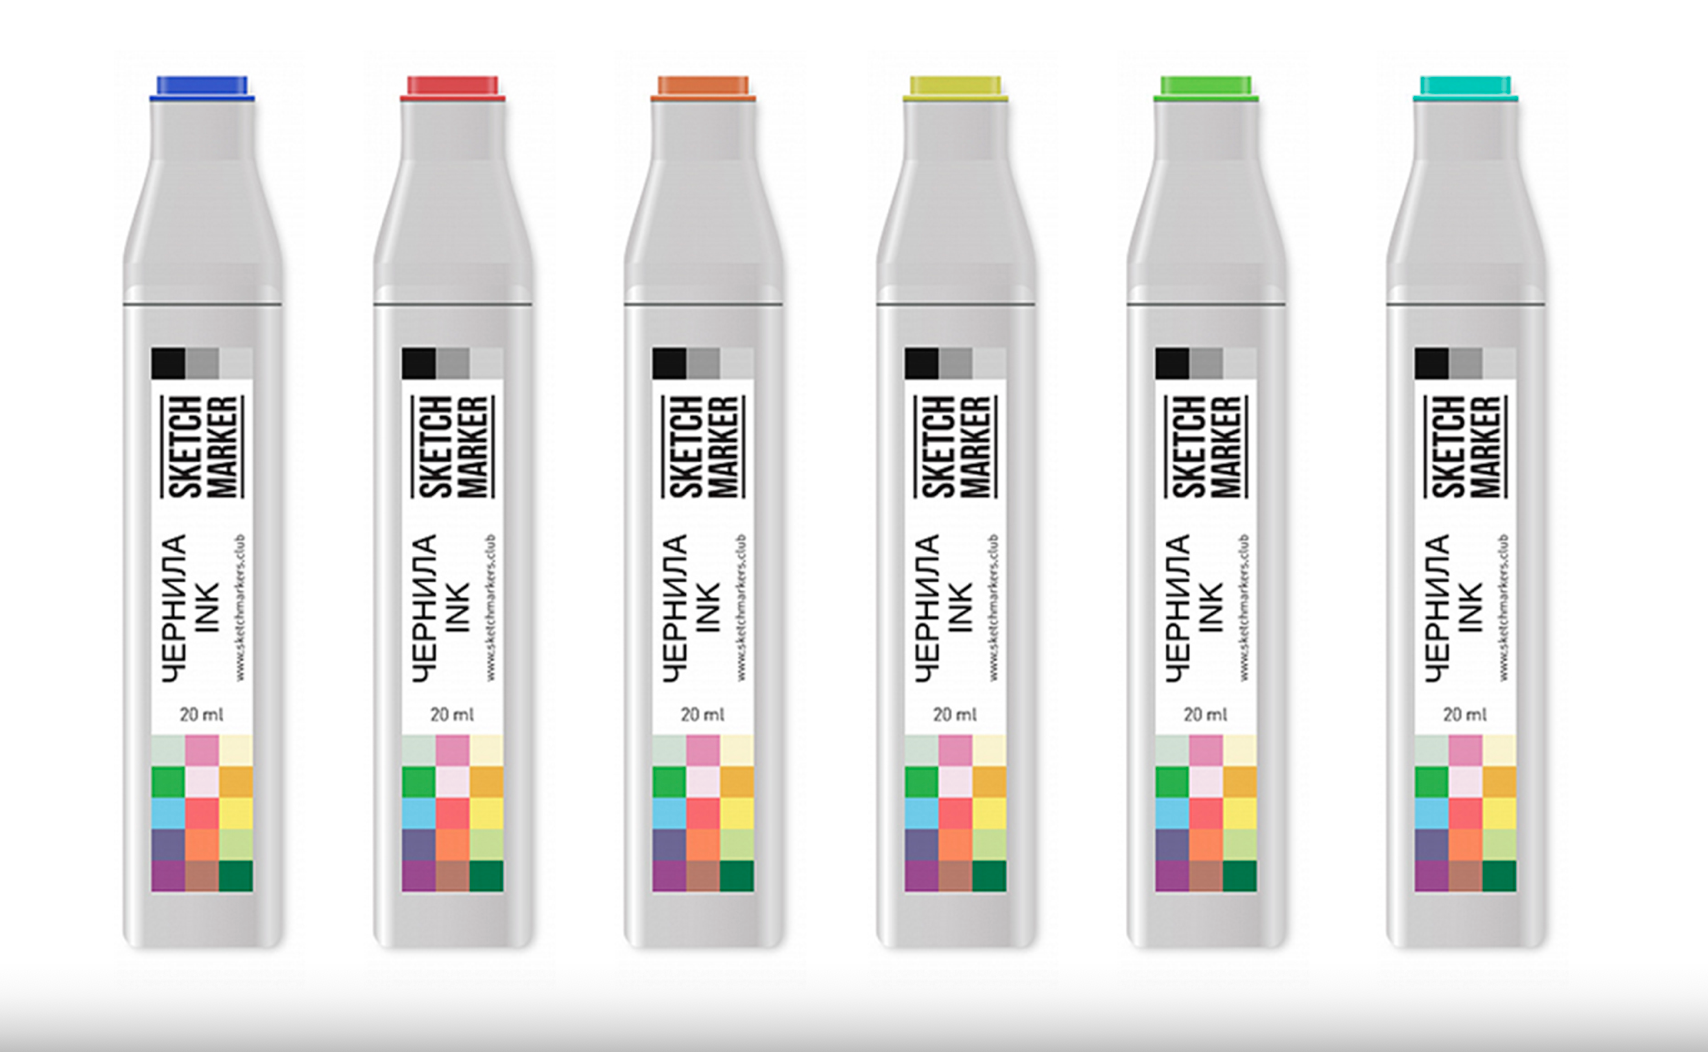 The Essential Guide to the SketchMarker Number System